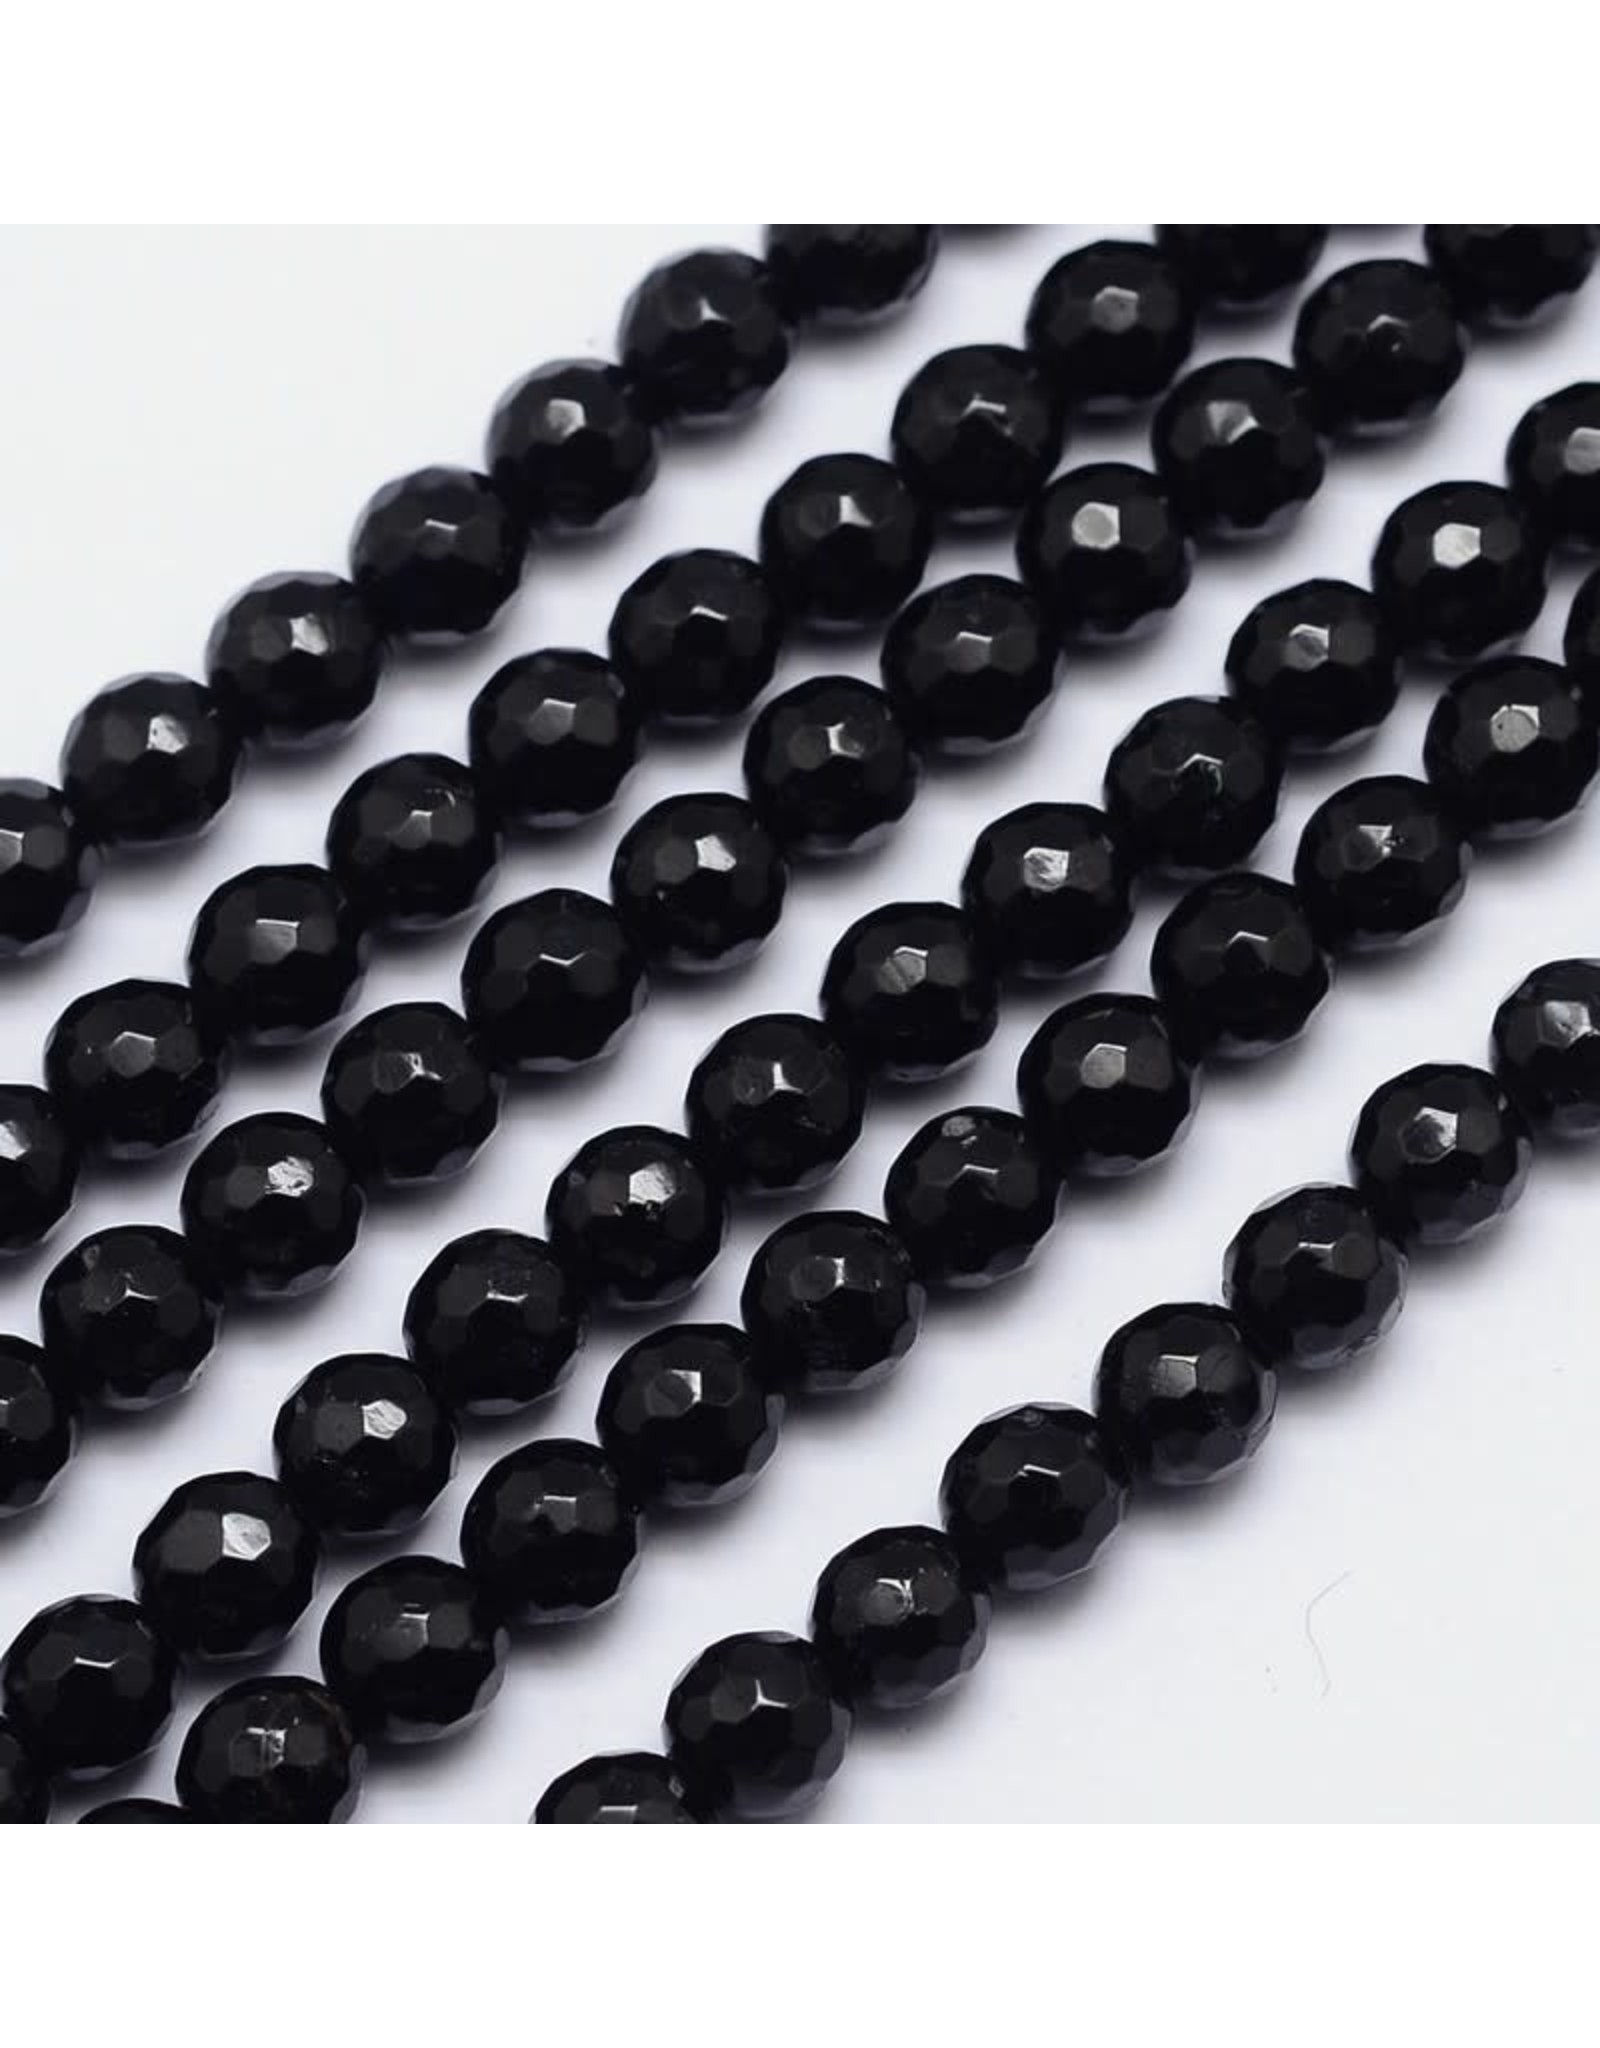 Black Tourmaline  Faceted 6mm  Grade AB+ 15” Strand  approx  x60 Beads